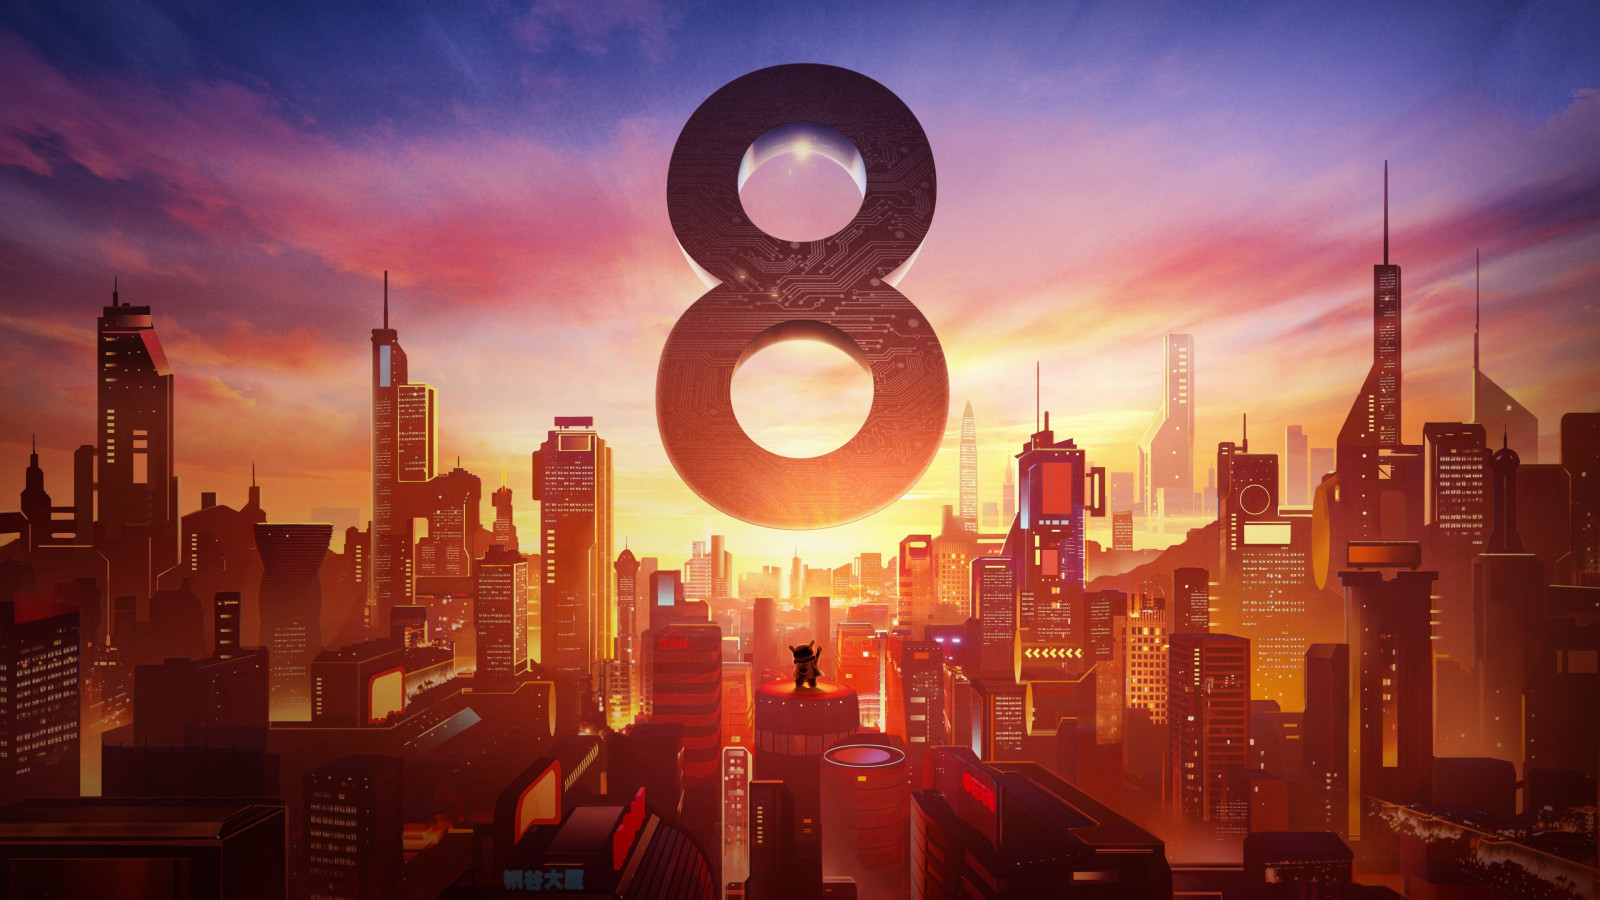 Xiaomi Mi 8. Poster from the launch event wallpaper 1600x900